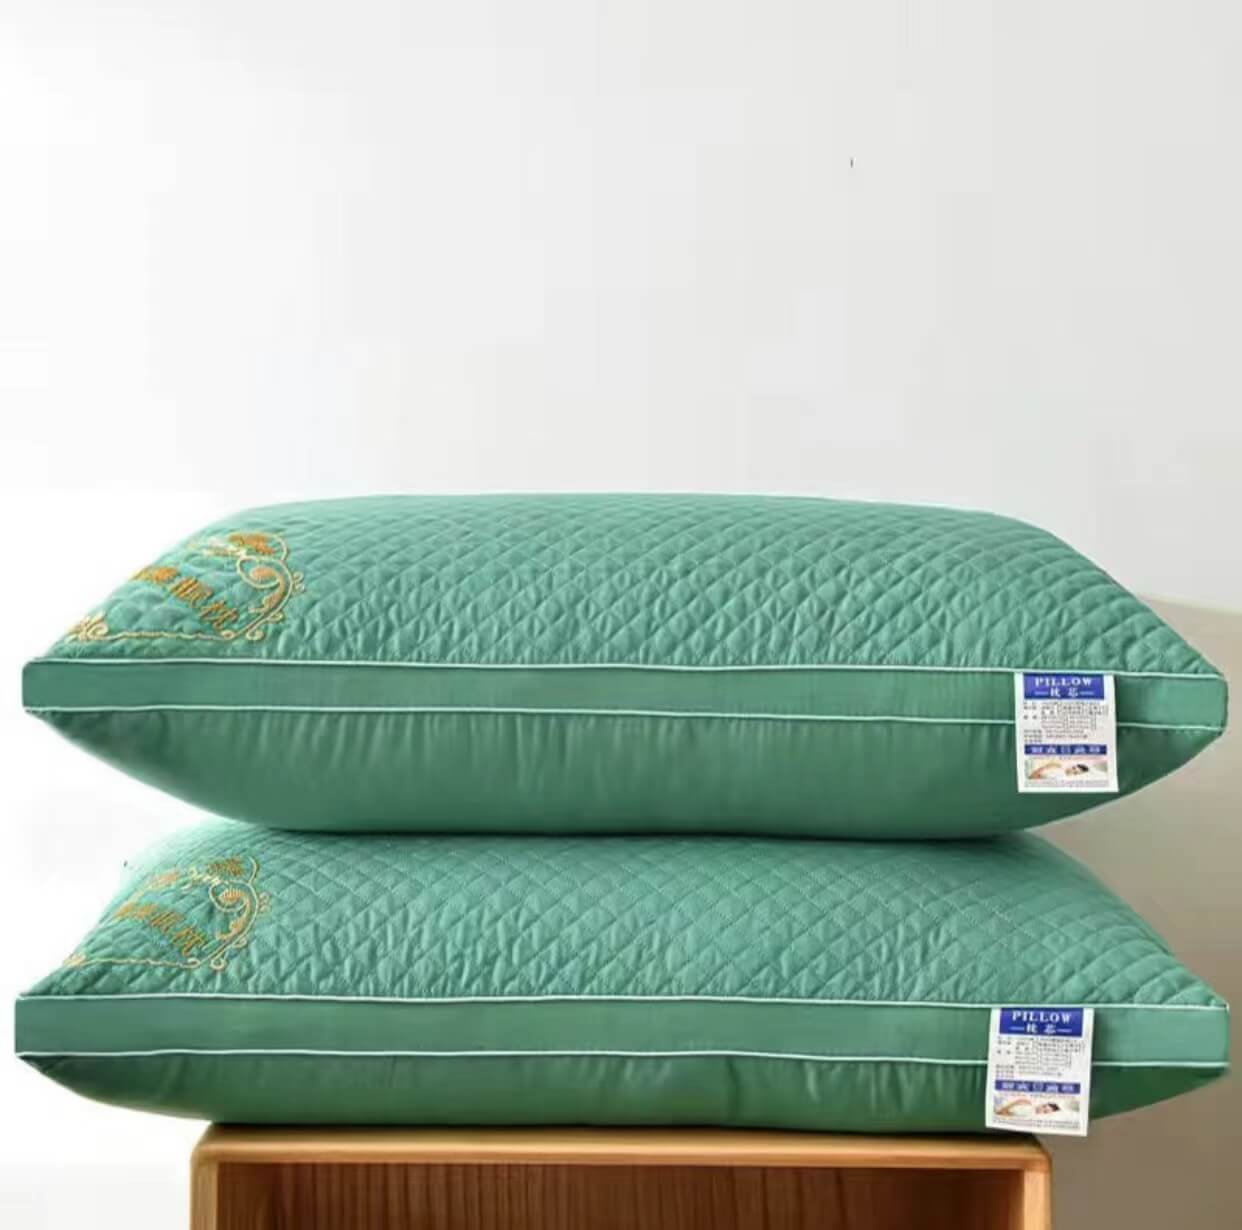 Five-star hotel sleep pillow super soft down double pillow adult neck pillow buy one get one free